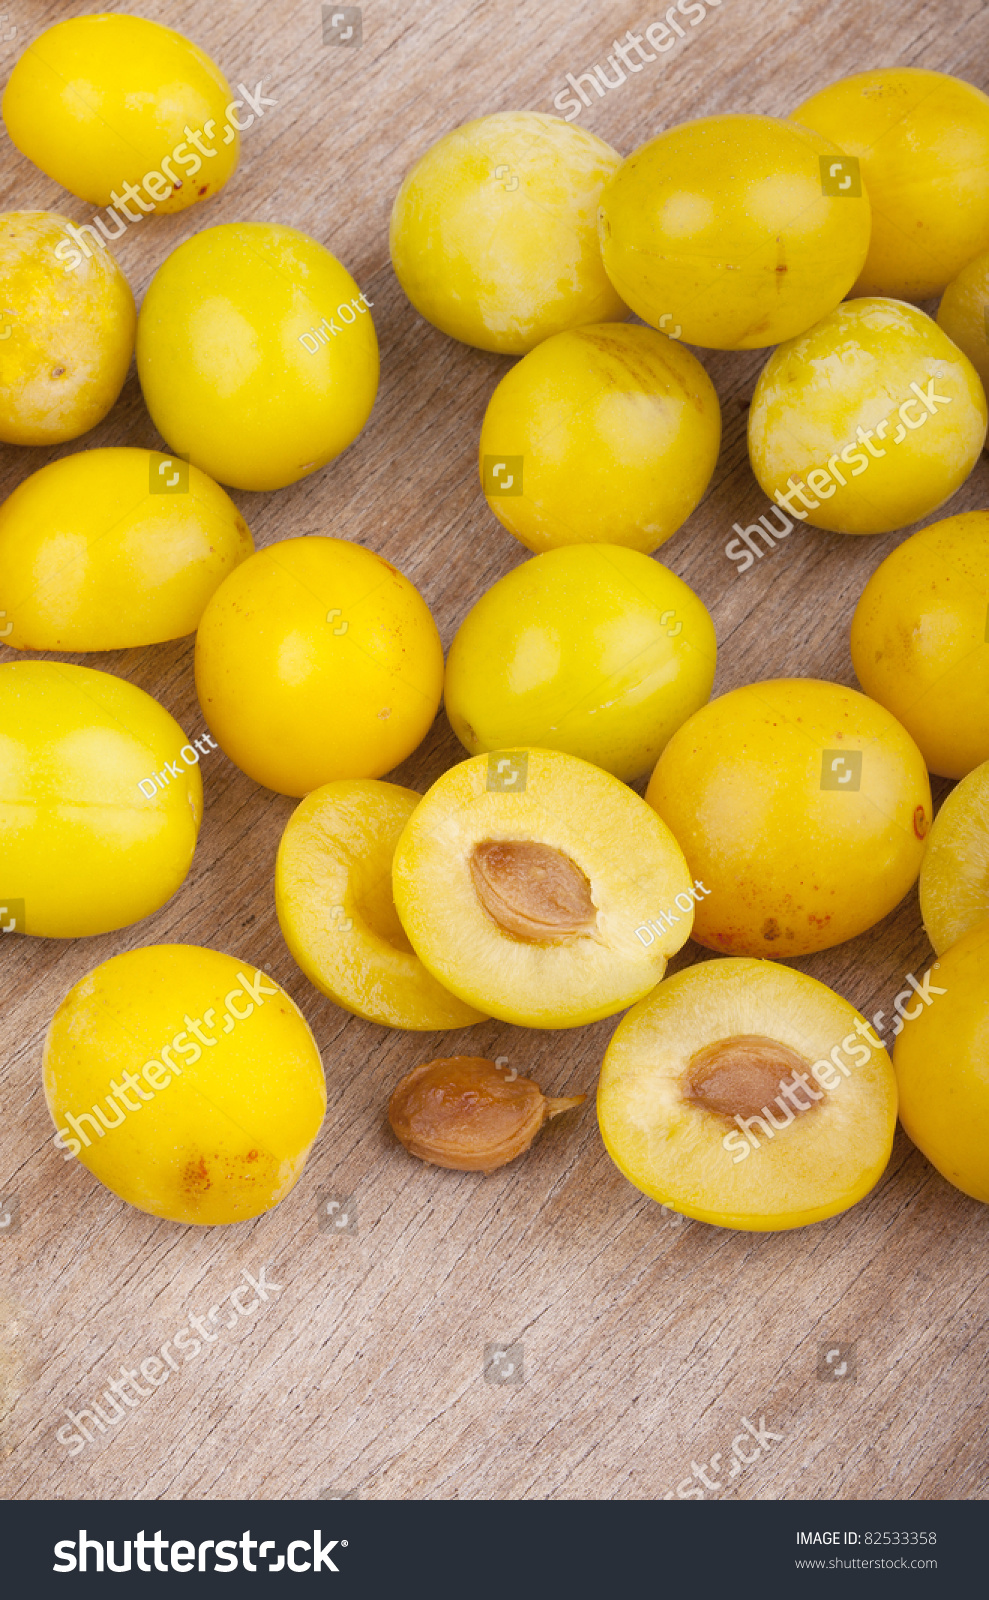 Download Studioshot Small Yellow Plums Known Mellow Stock Photo Edit Now 82533358 PSD Mockup Templates